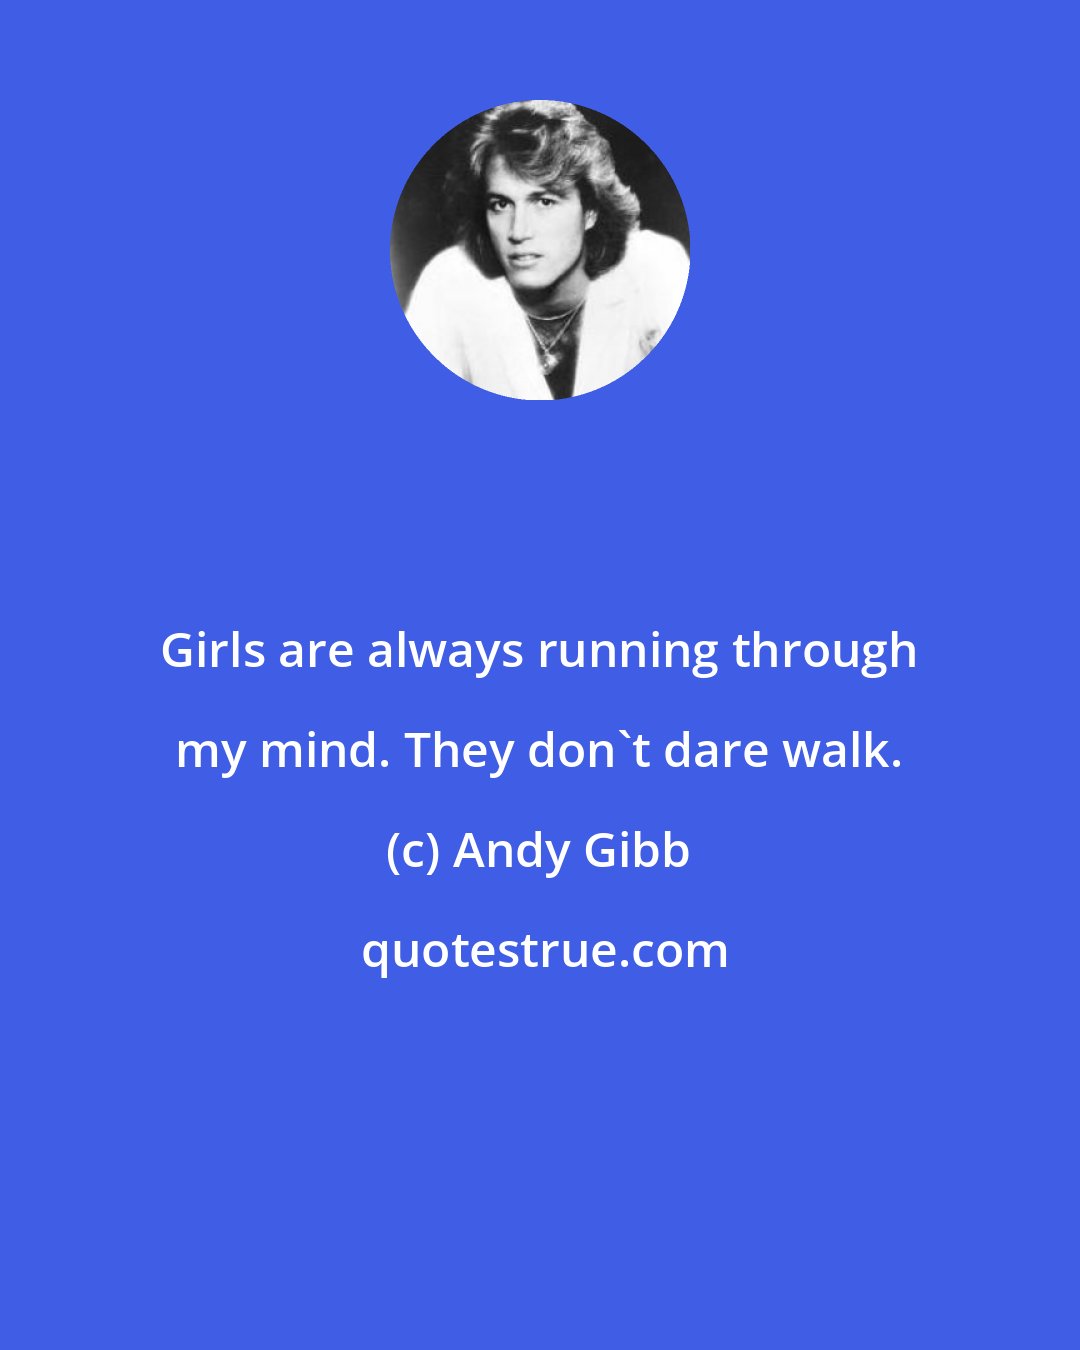 Andy Gibb: Girls are always running through my mind. They don't dare walk.